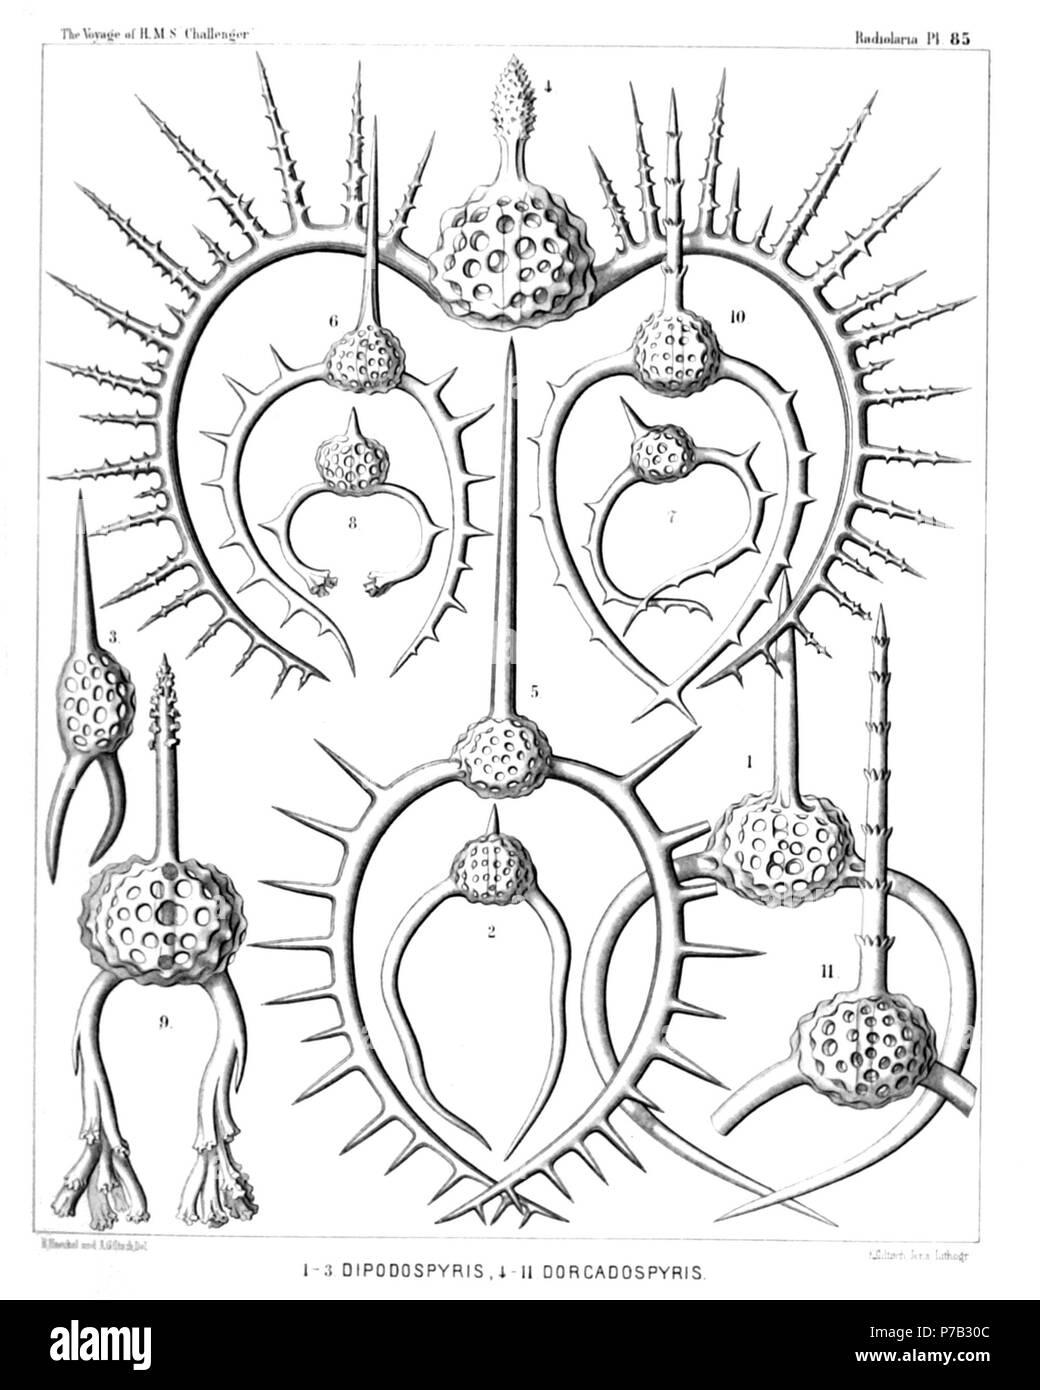 English: Illustration from Report on the Radiolaria collected by H.M.S. Challenger during the years 1873-1876. Part III. Original description follows:  Plate 85. Zygospyrida.  Diam.  Fig. 1. Dipospyris forcipata, n. sp., × 300  Fig. 2. Dipospyris irregularis, n. sp., × 200  Fig. 3. Dipospyris chelifer, n. sp., × 300  Fig. 4. Dorcadospyris dinoceras, n. sp., × 400  Fig. 5. Dorcadospyris antilope, n. sp., × 200  Fig. 6. Dorcadospyris dentata, n. sp., × 200  Fig. 7. Dorcadospyris decussata, n. sp., × 200  Fig. 8. Dendrospyris polyrrhiza, n. sp., × 200  Fig. 9. Dendrospyris arborescens, n. sp., ×  Stock Photo